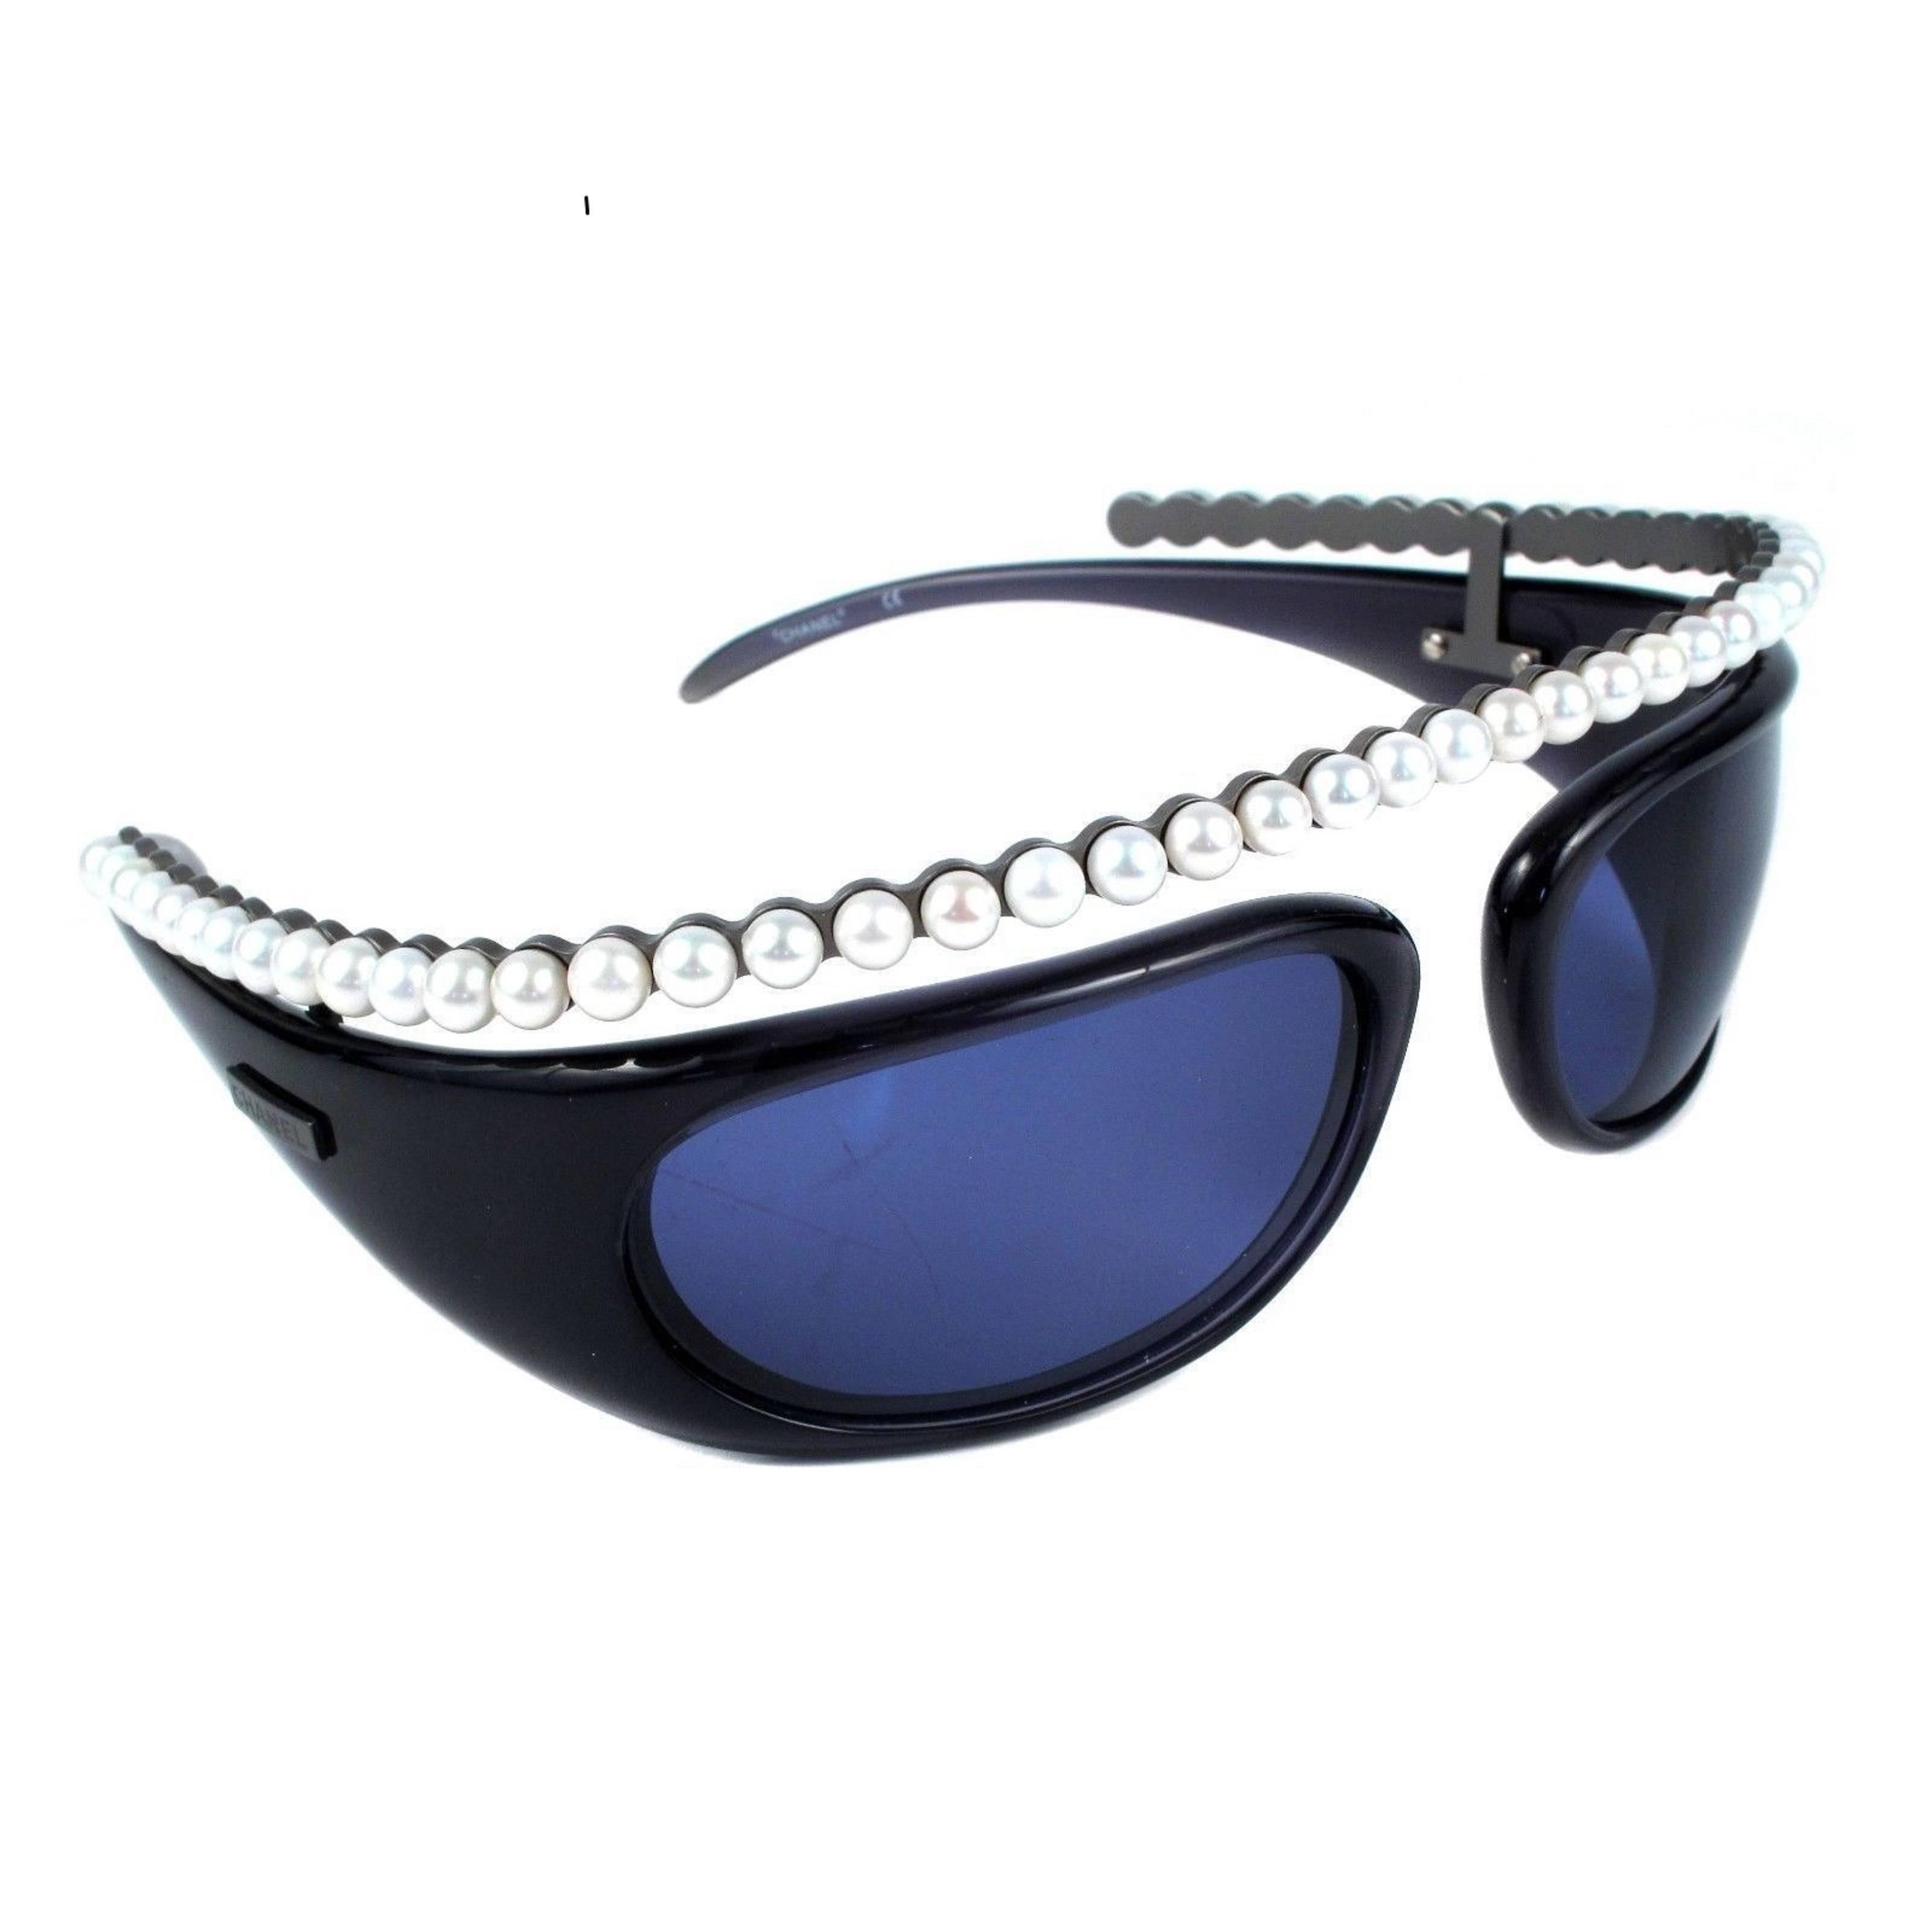 Live the Fantasy when wearing these undeniably Chanel wraparound sunglasses!  First Introduced in 2003, these buzz-worthy 